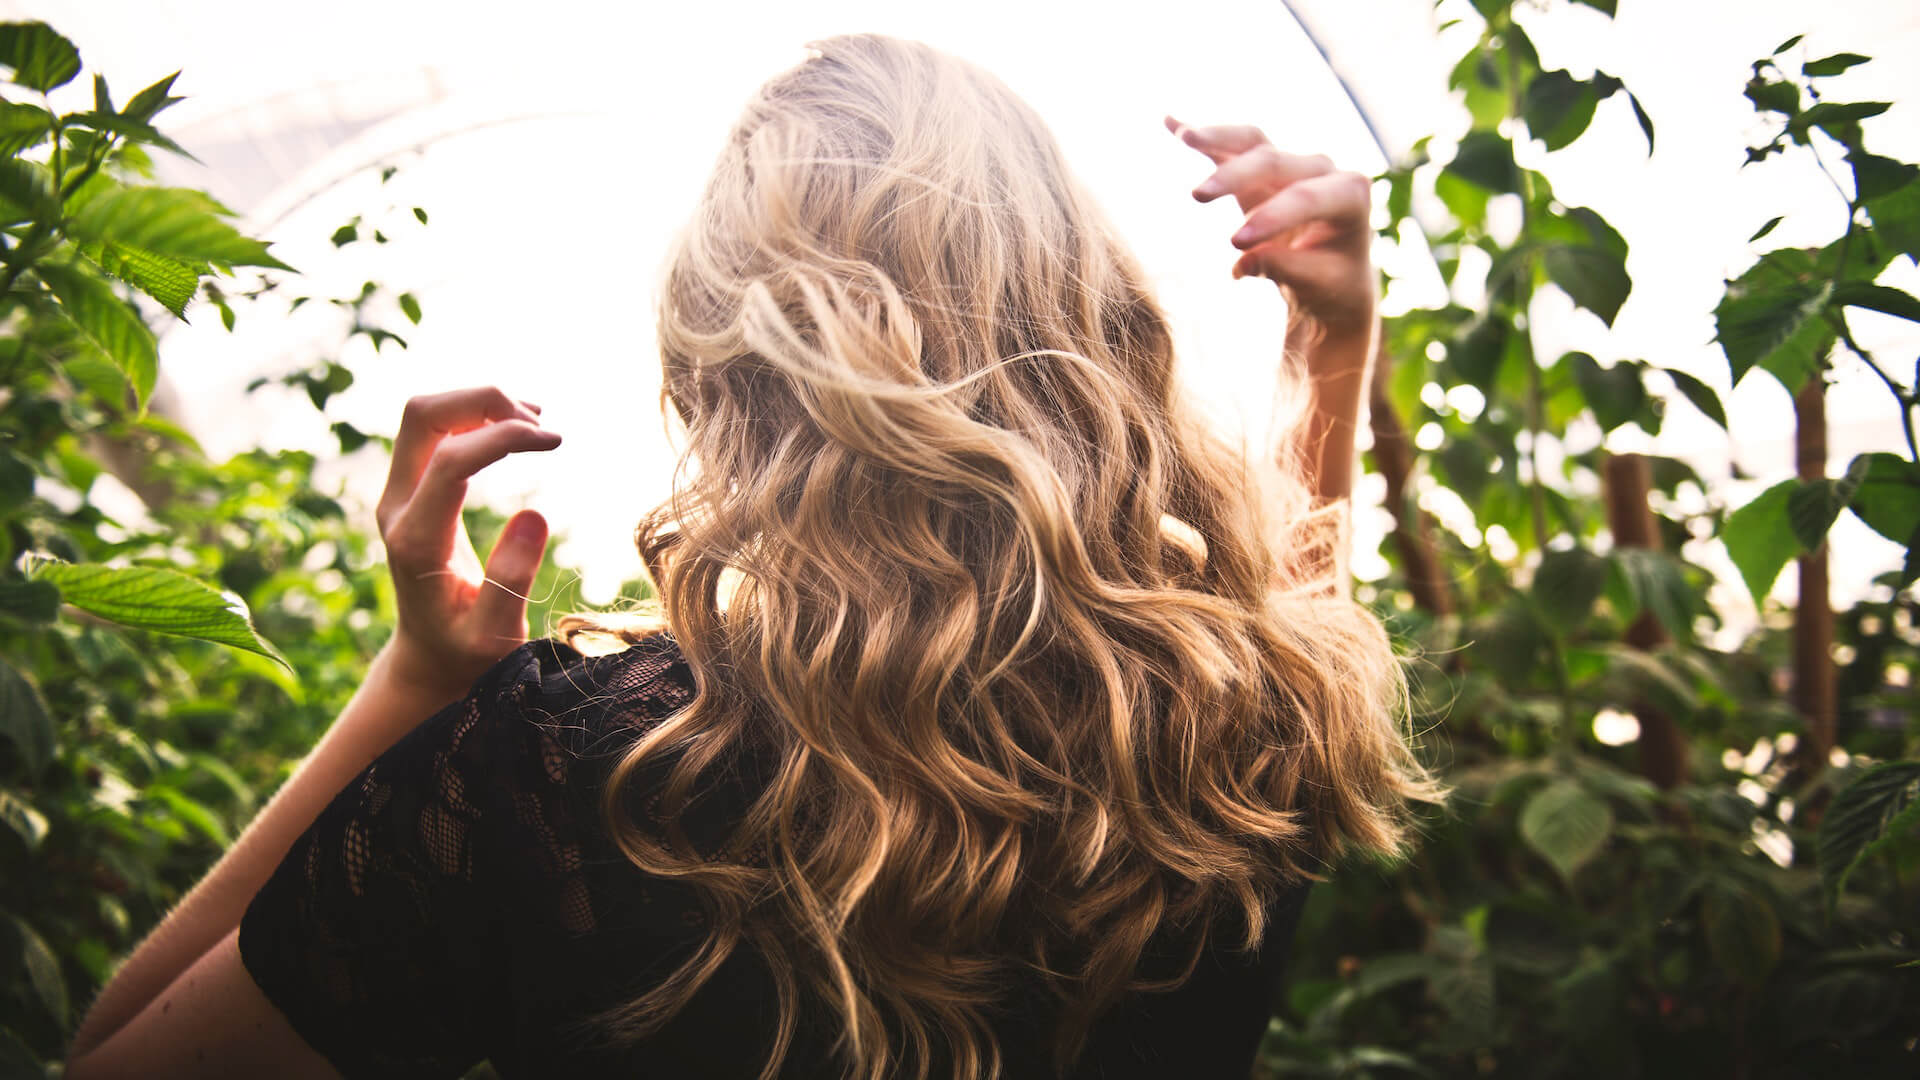 woman with blonde curly hair